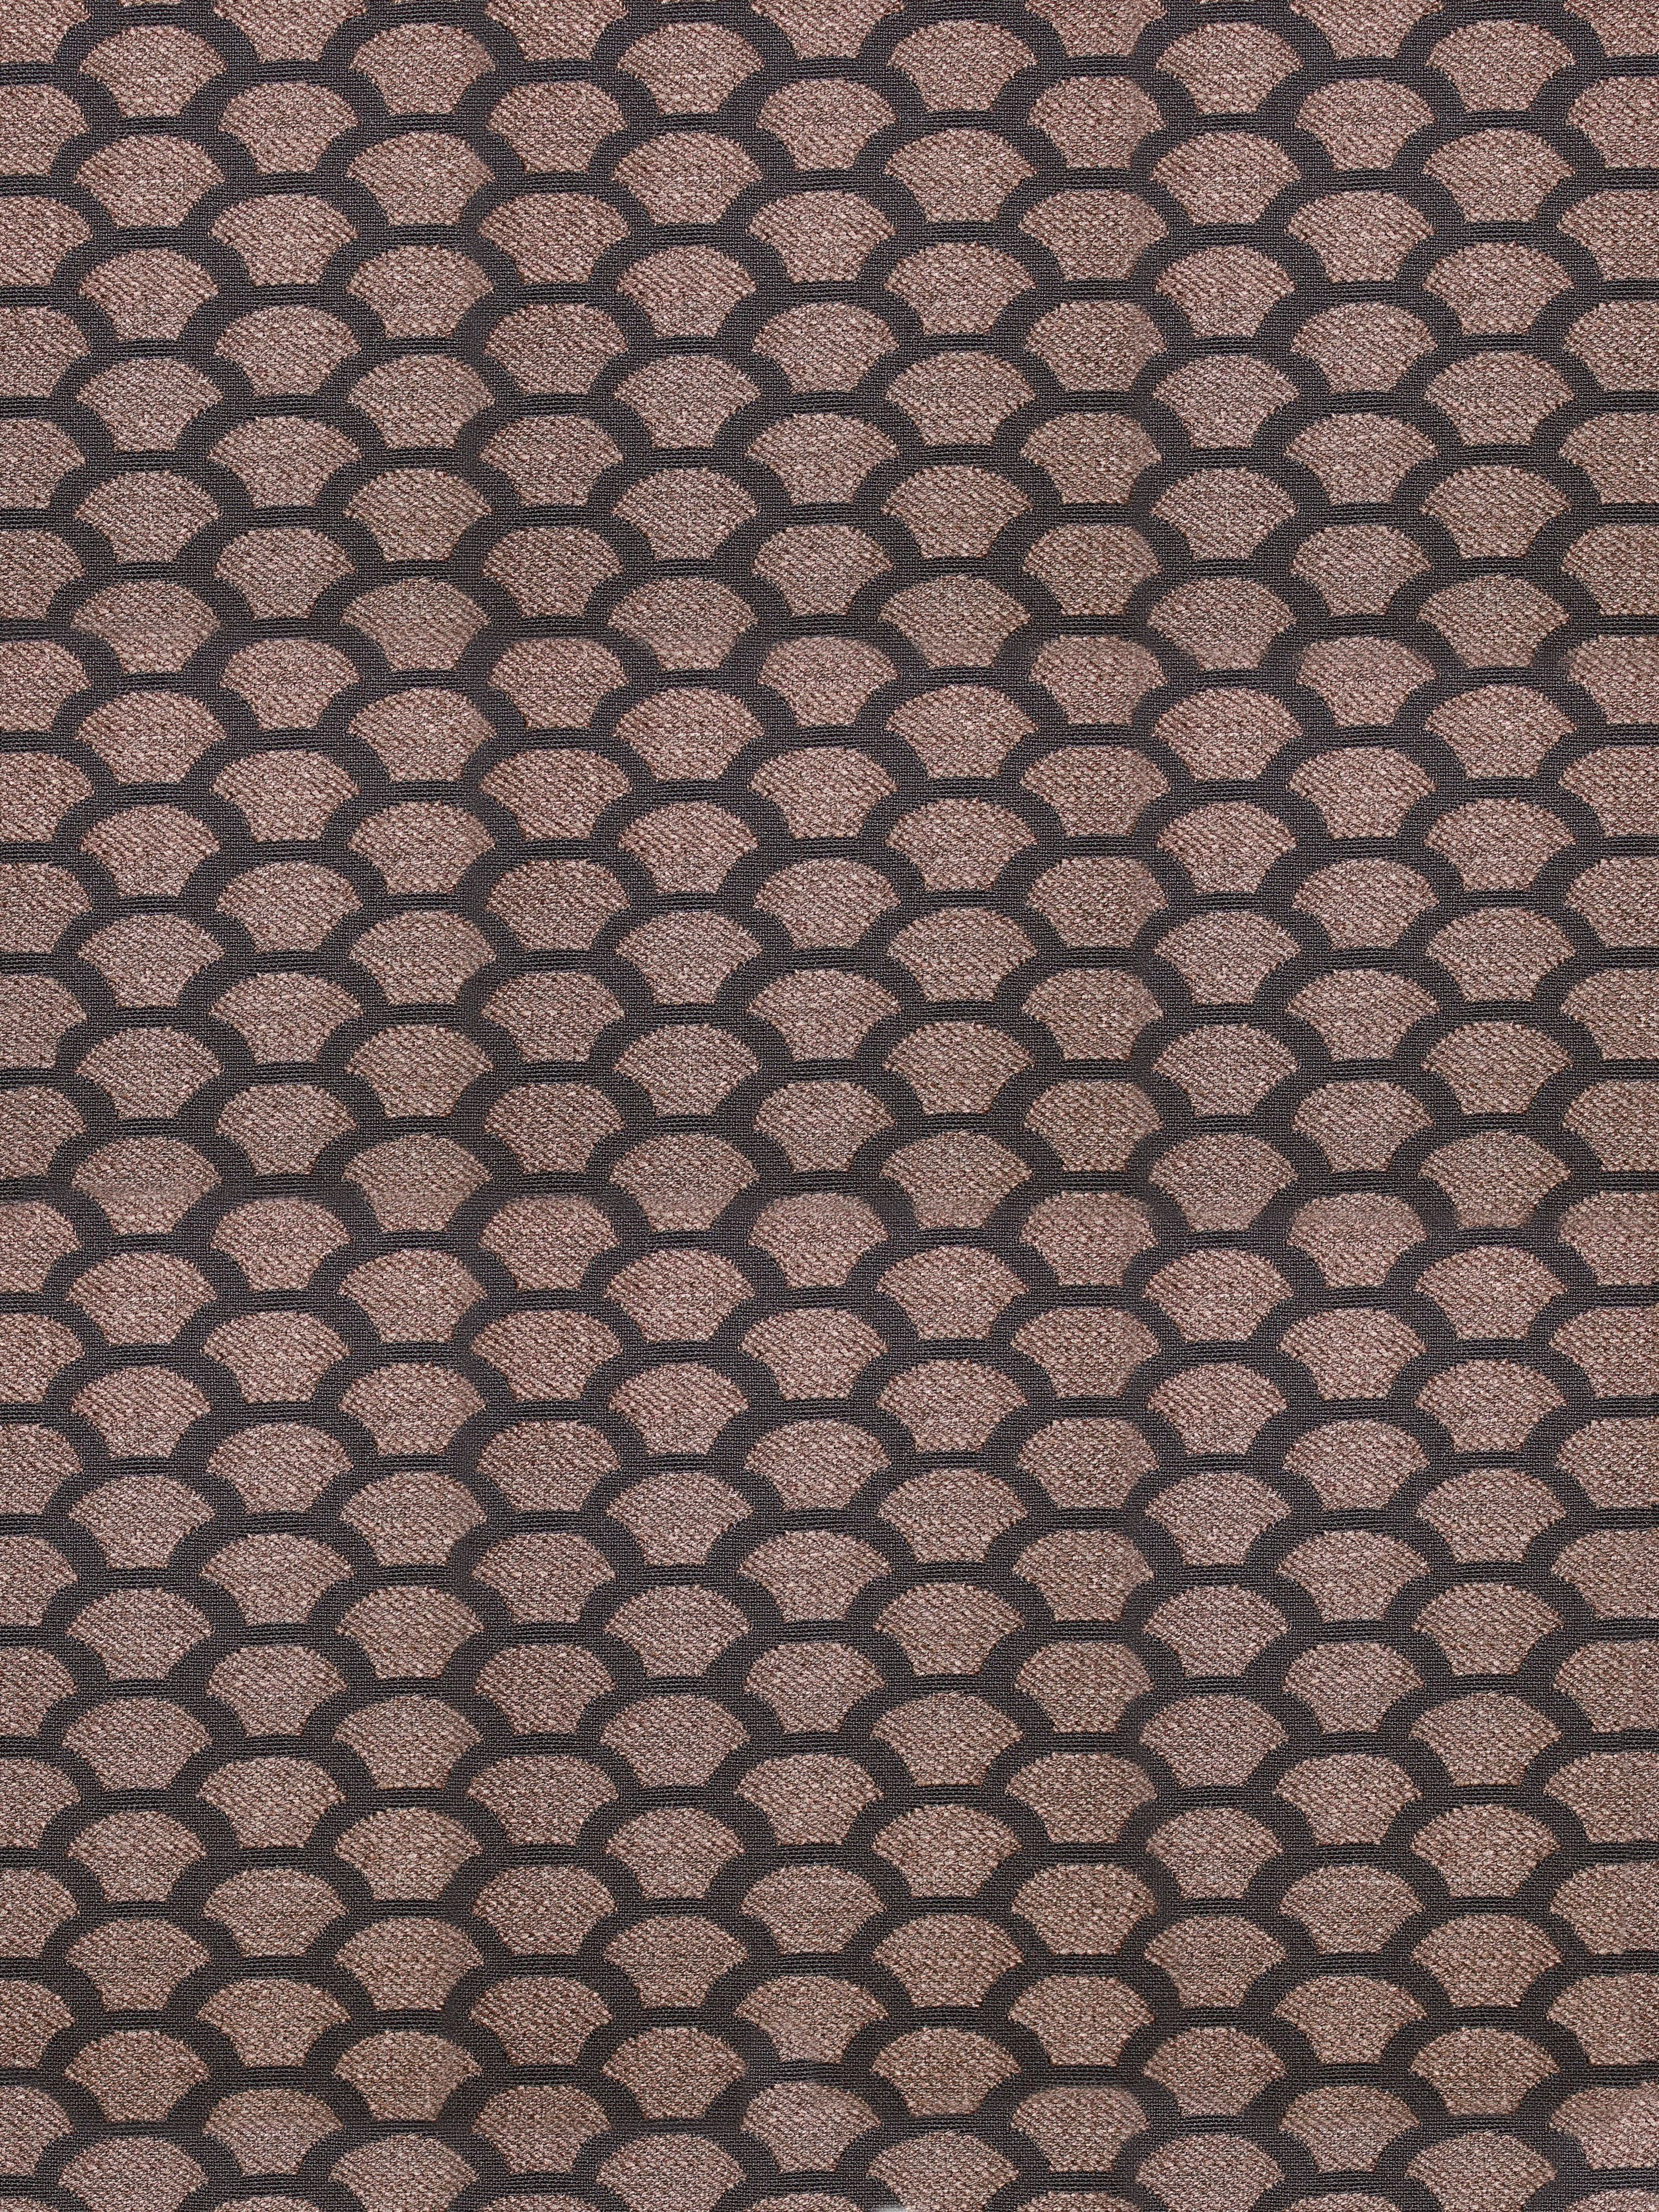 Poseidon fabric in espresso color - pattern number SC 000226972 - by Scalamandre in the Scalamandre Fabrics Book 1 collection